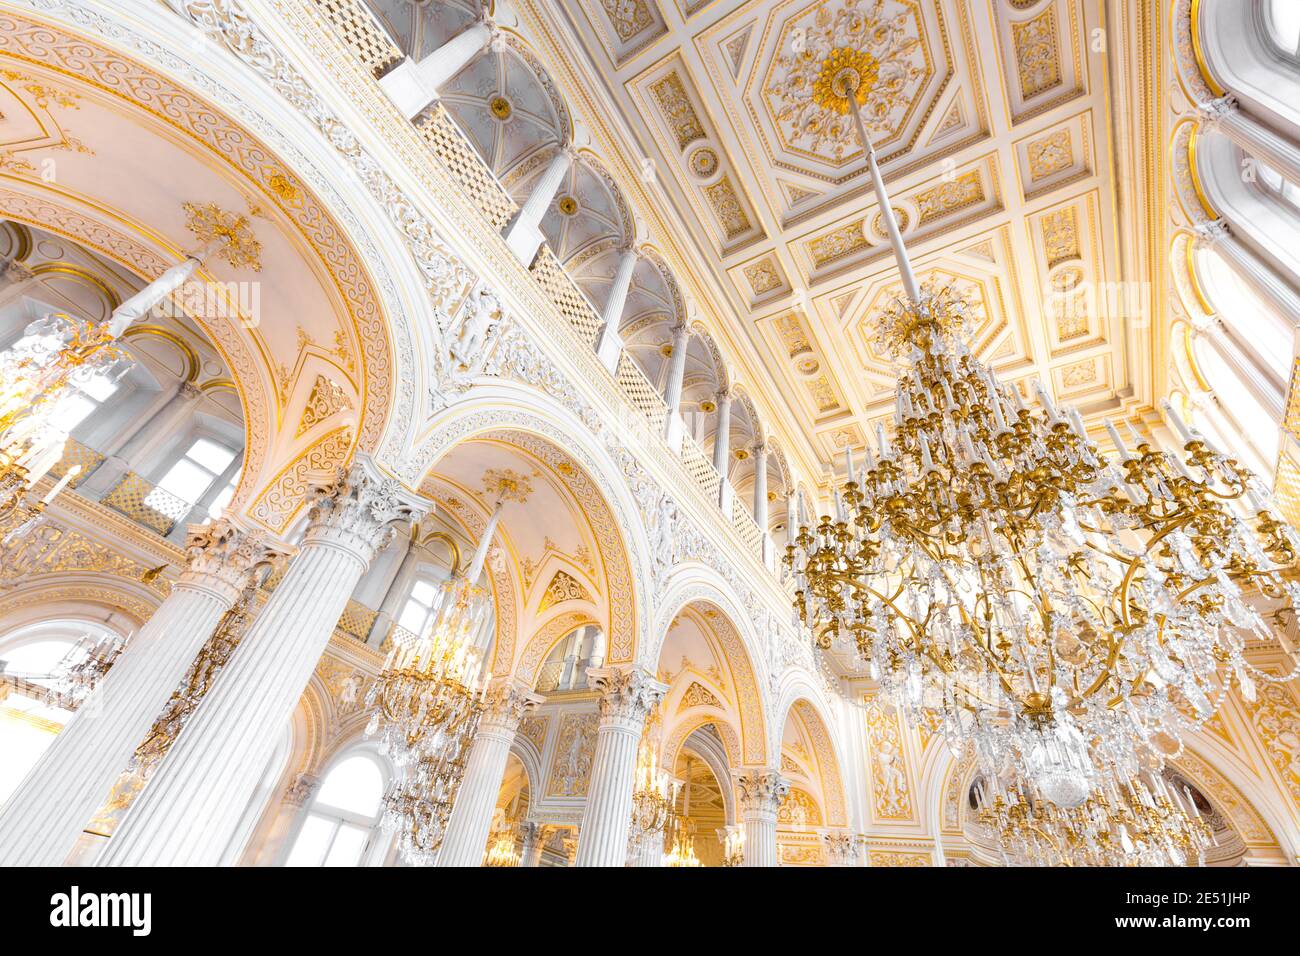 Wide angle view from below of a white and gold ball room in the Ermitage museum, lit by large chandeliers Stock Photo